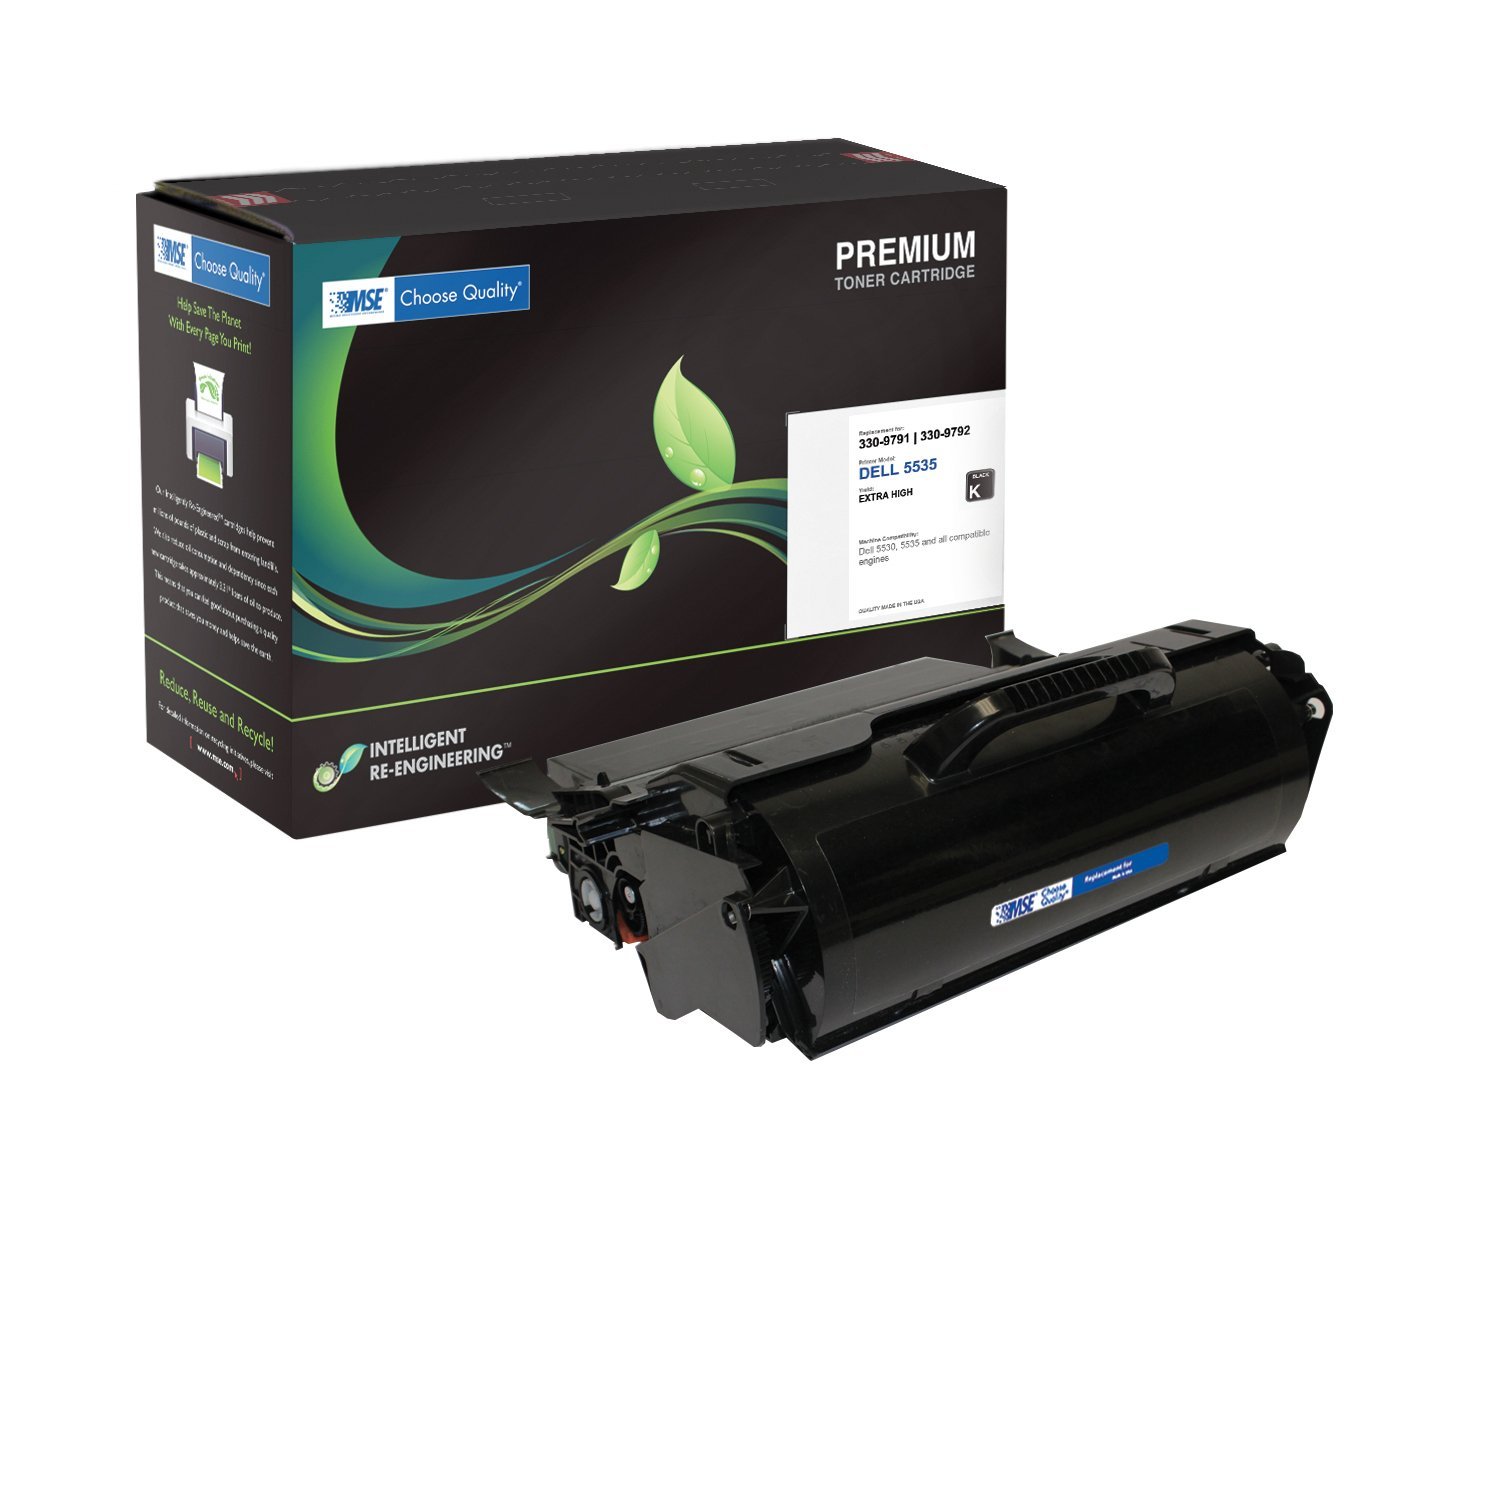 Dell 330-9791, 330-9792, H1RP7, PK6Y4, Y4Y5R Brand New Compatible Extended Yield Laser Toner Cartridge by MSE 02-70-55162